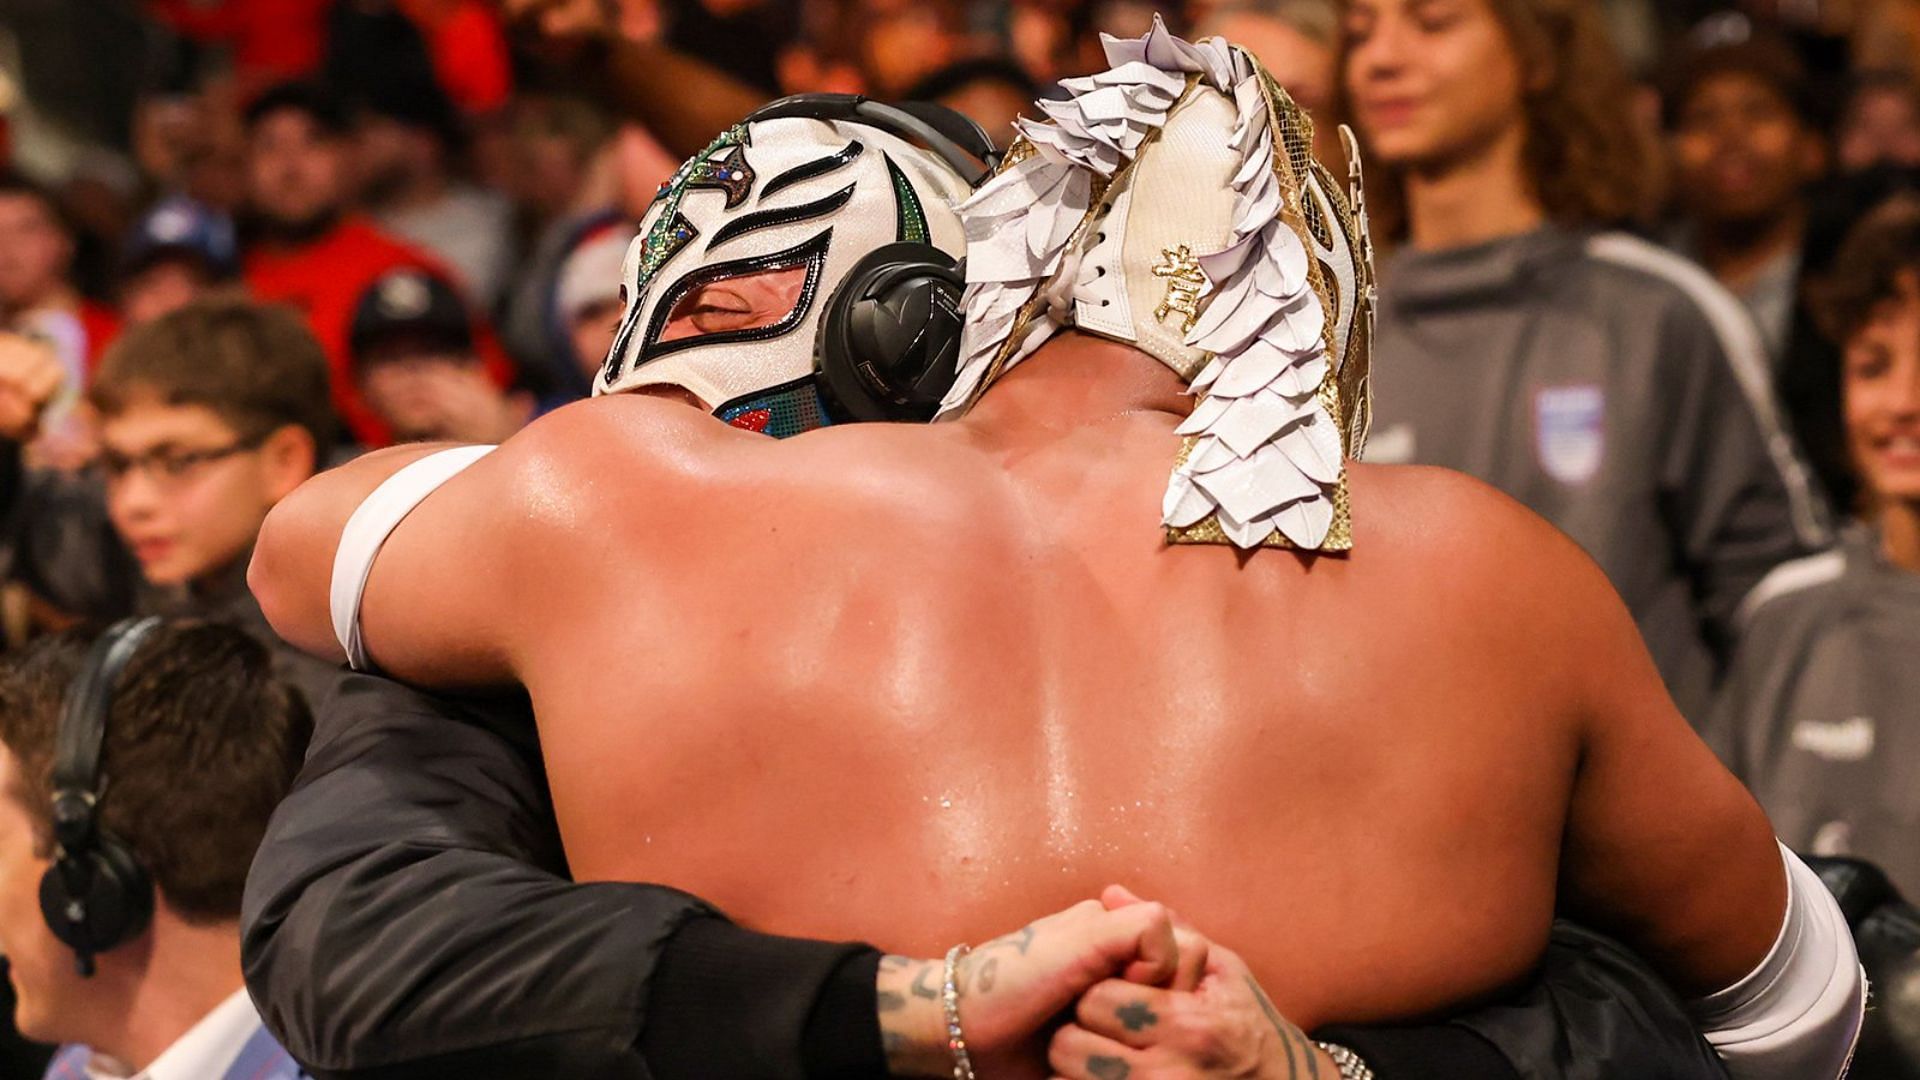 WWE Superstars Dragon Lee and Rey Mysterio